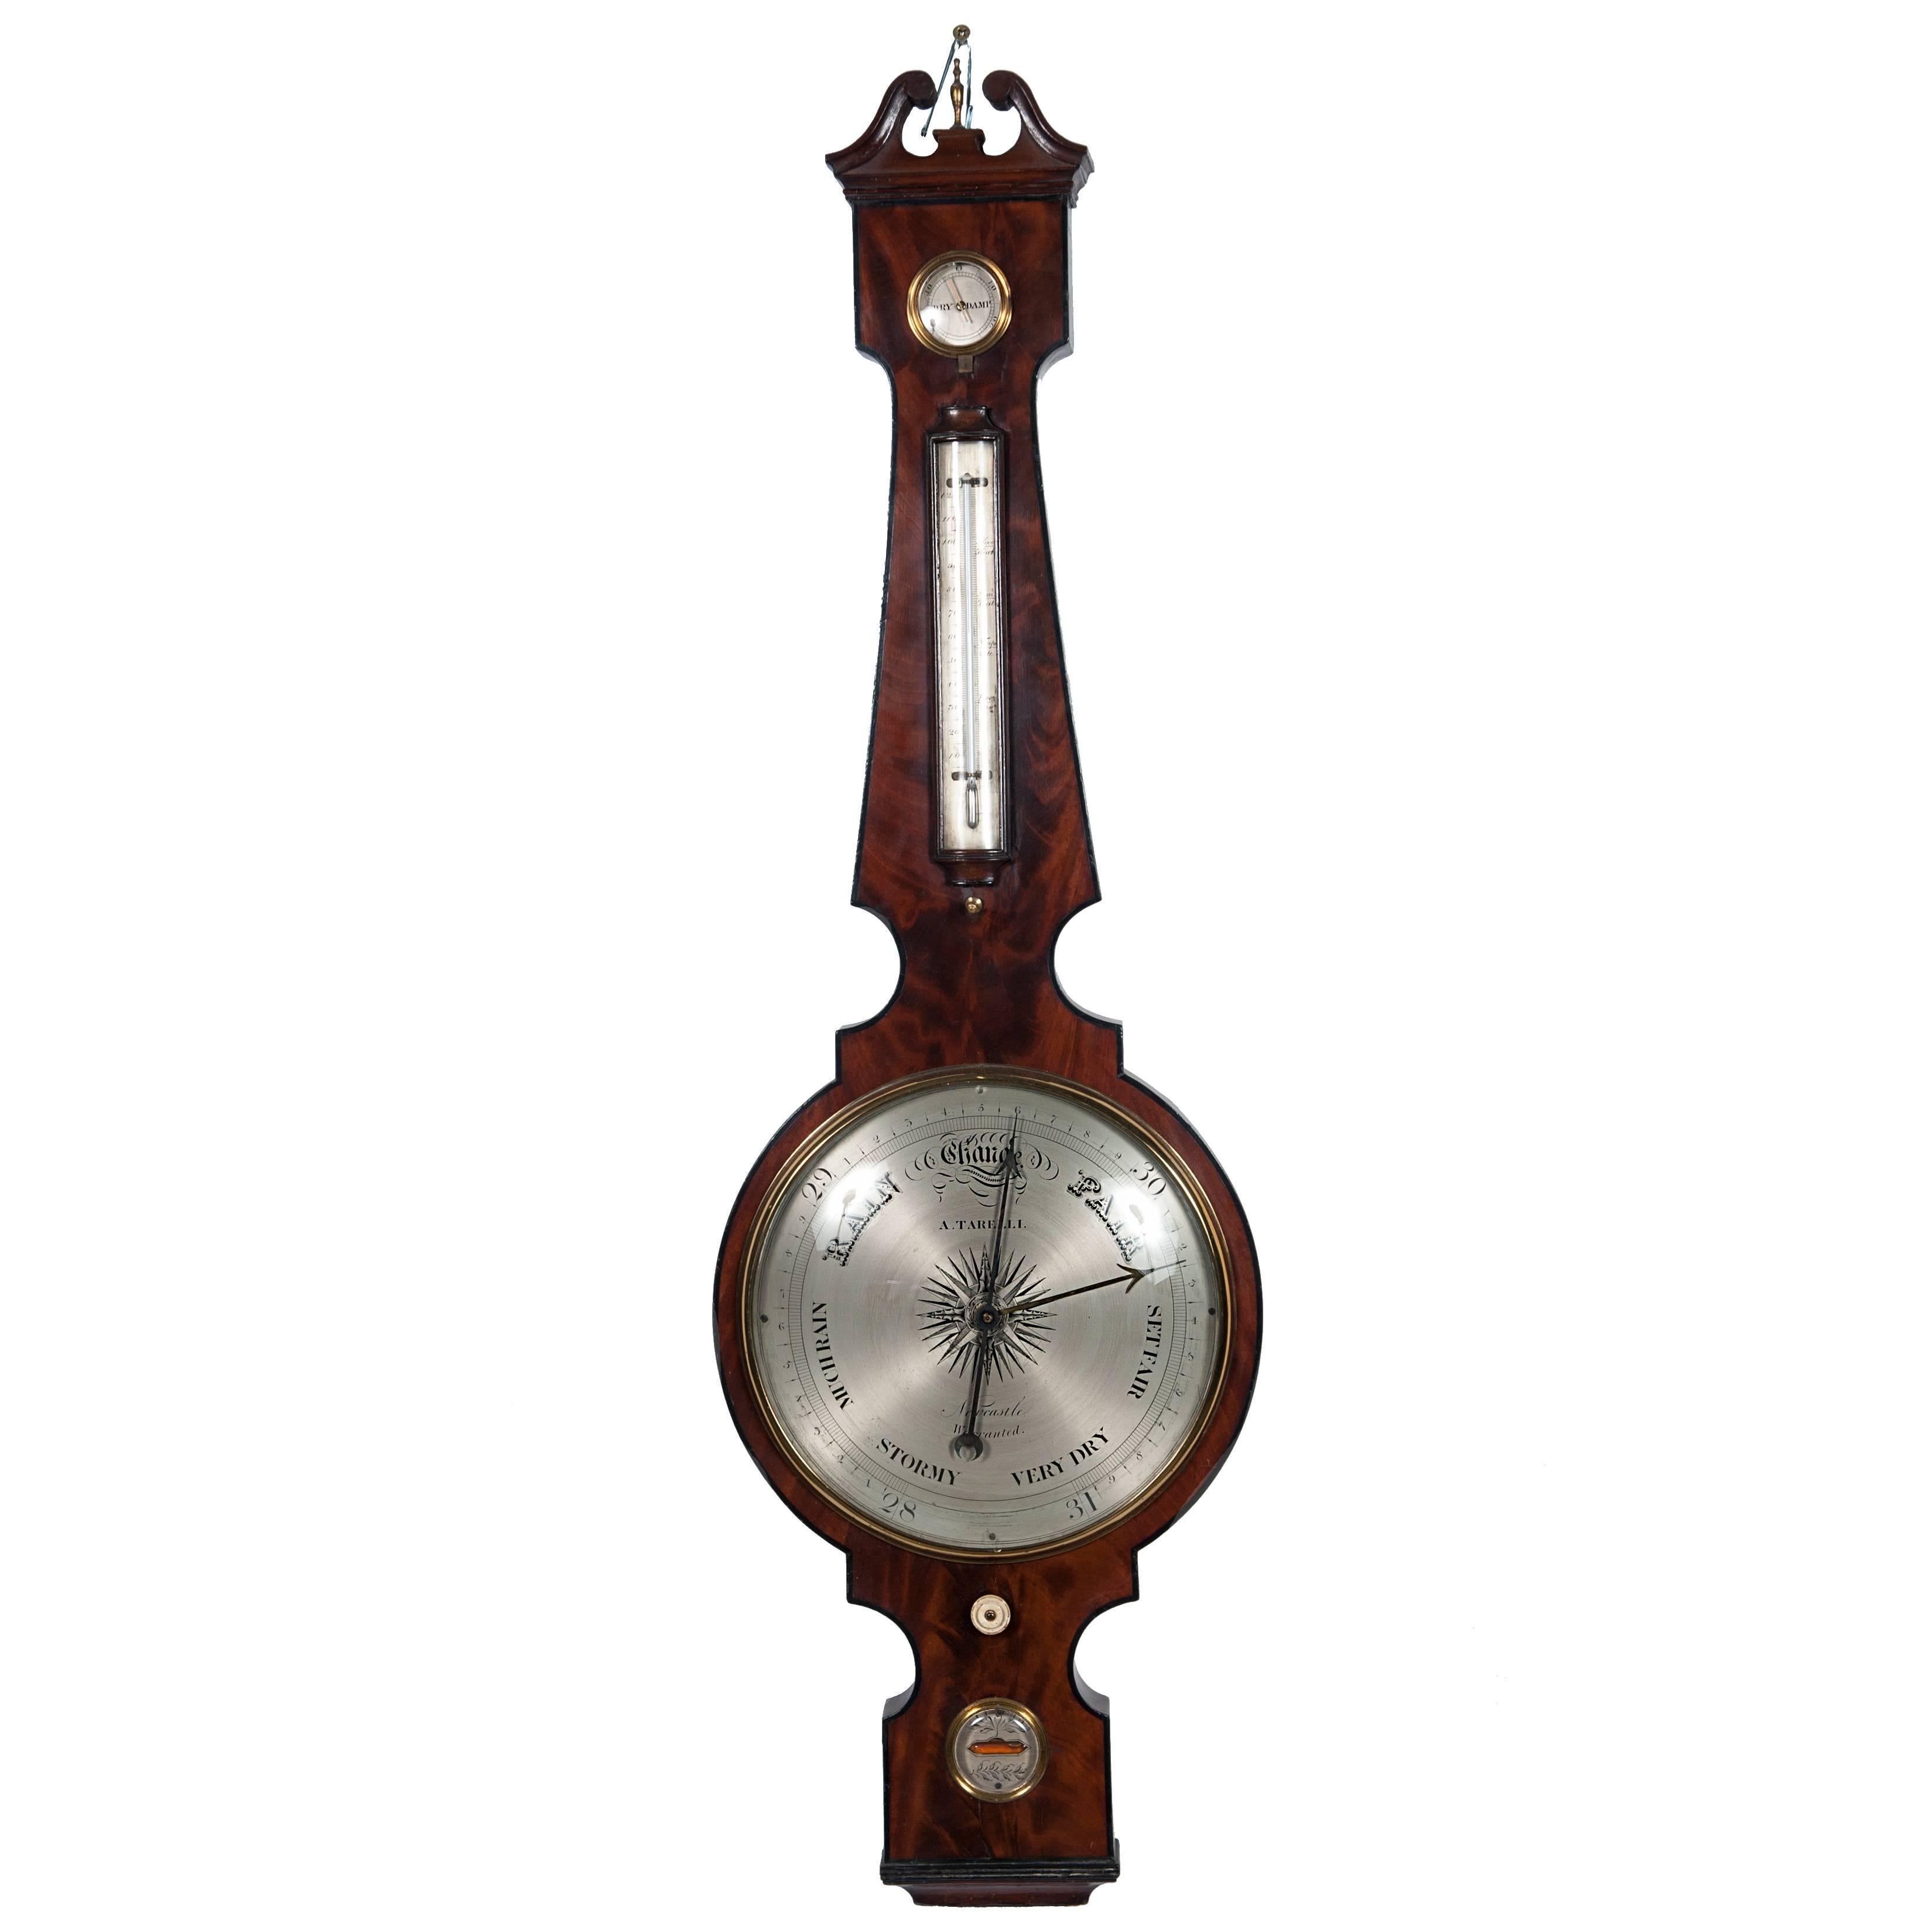 Imposing King-Size Wheel Barometer by "Tarelli" New Castle, circa 1840 For Sale